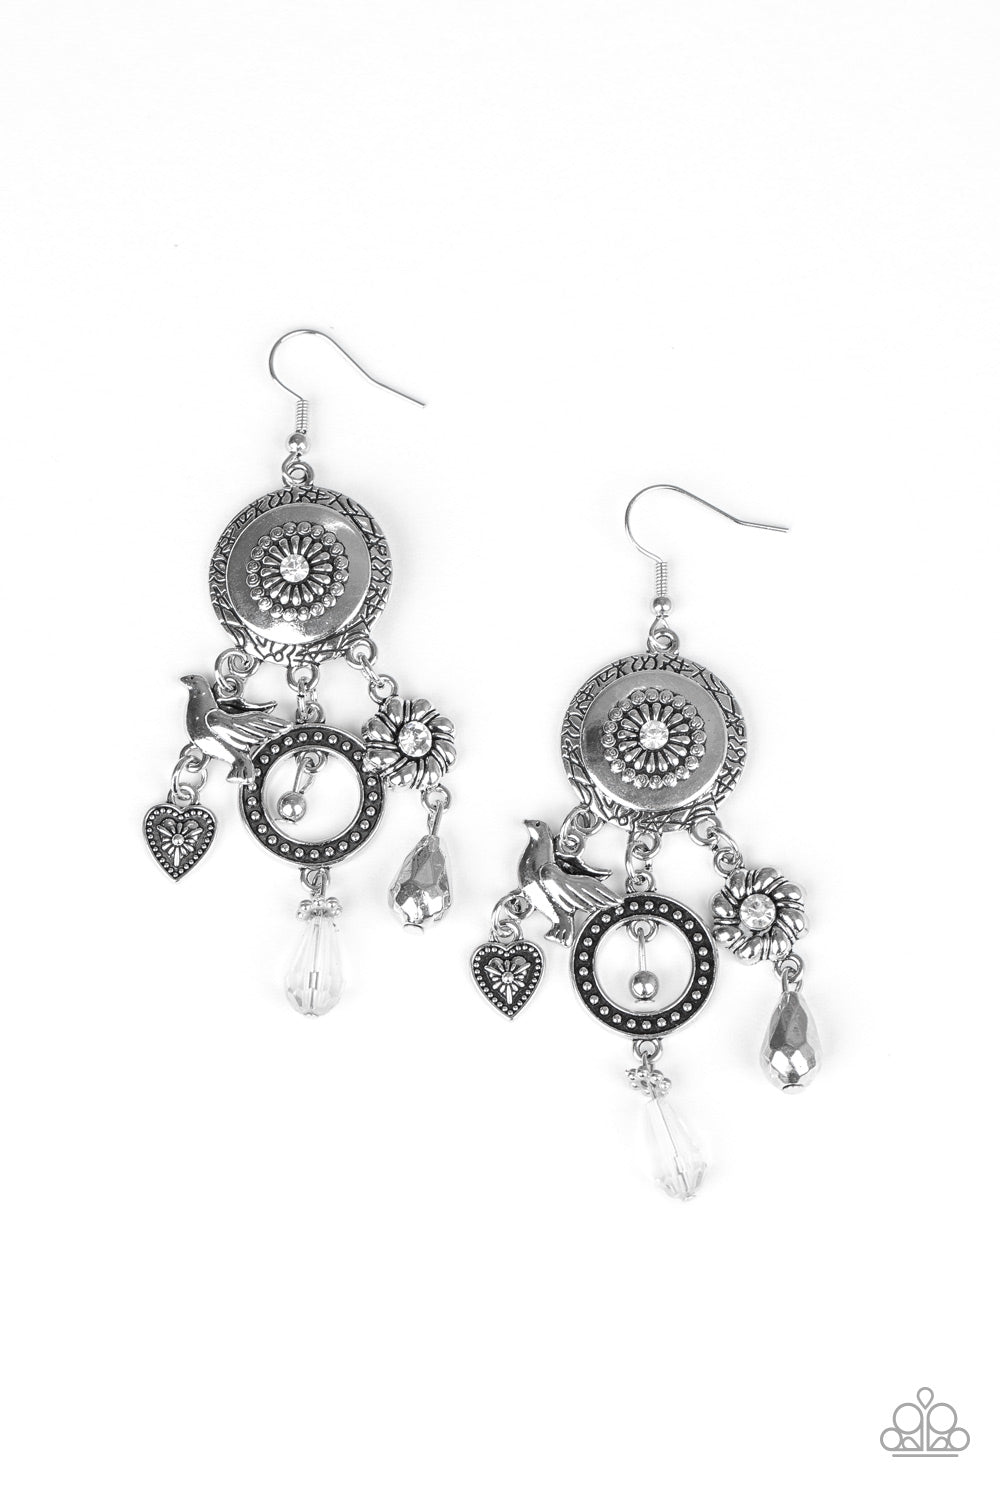 Springtime Essence - Silver Earrings - Paparazzi Accessories - Infused with glittery white rhinestones and crystal-like accents, a whimsical display of silver heart, flower, and bird charms dance from the bottom of a decorative floral silver frame, creating a noisy fringe. Earring attaches to a standard fishhook fitting. Sold as one pair of earrings.